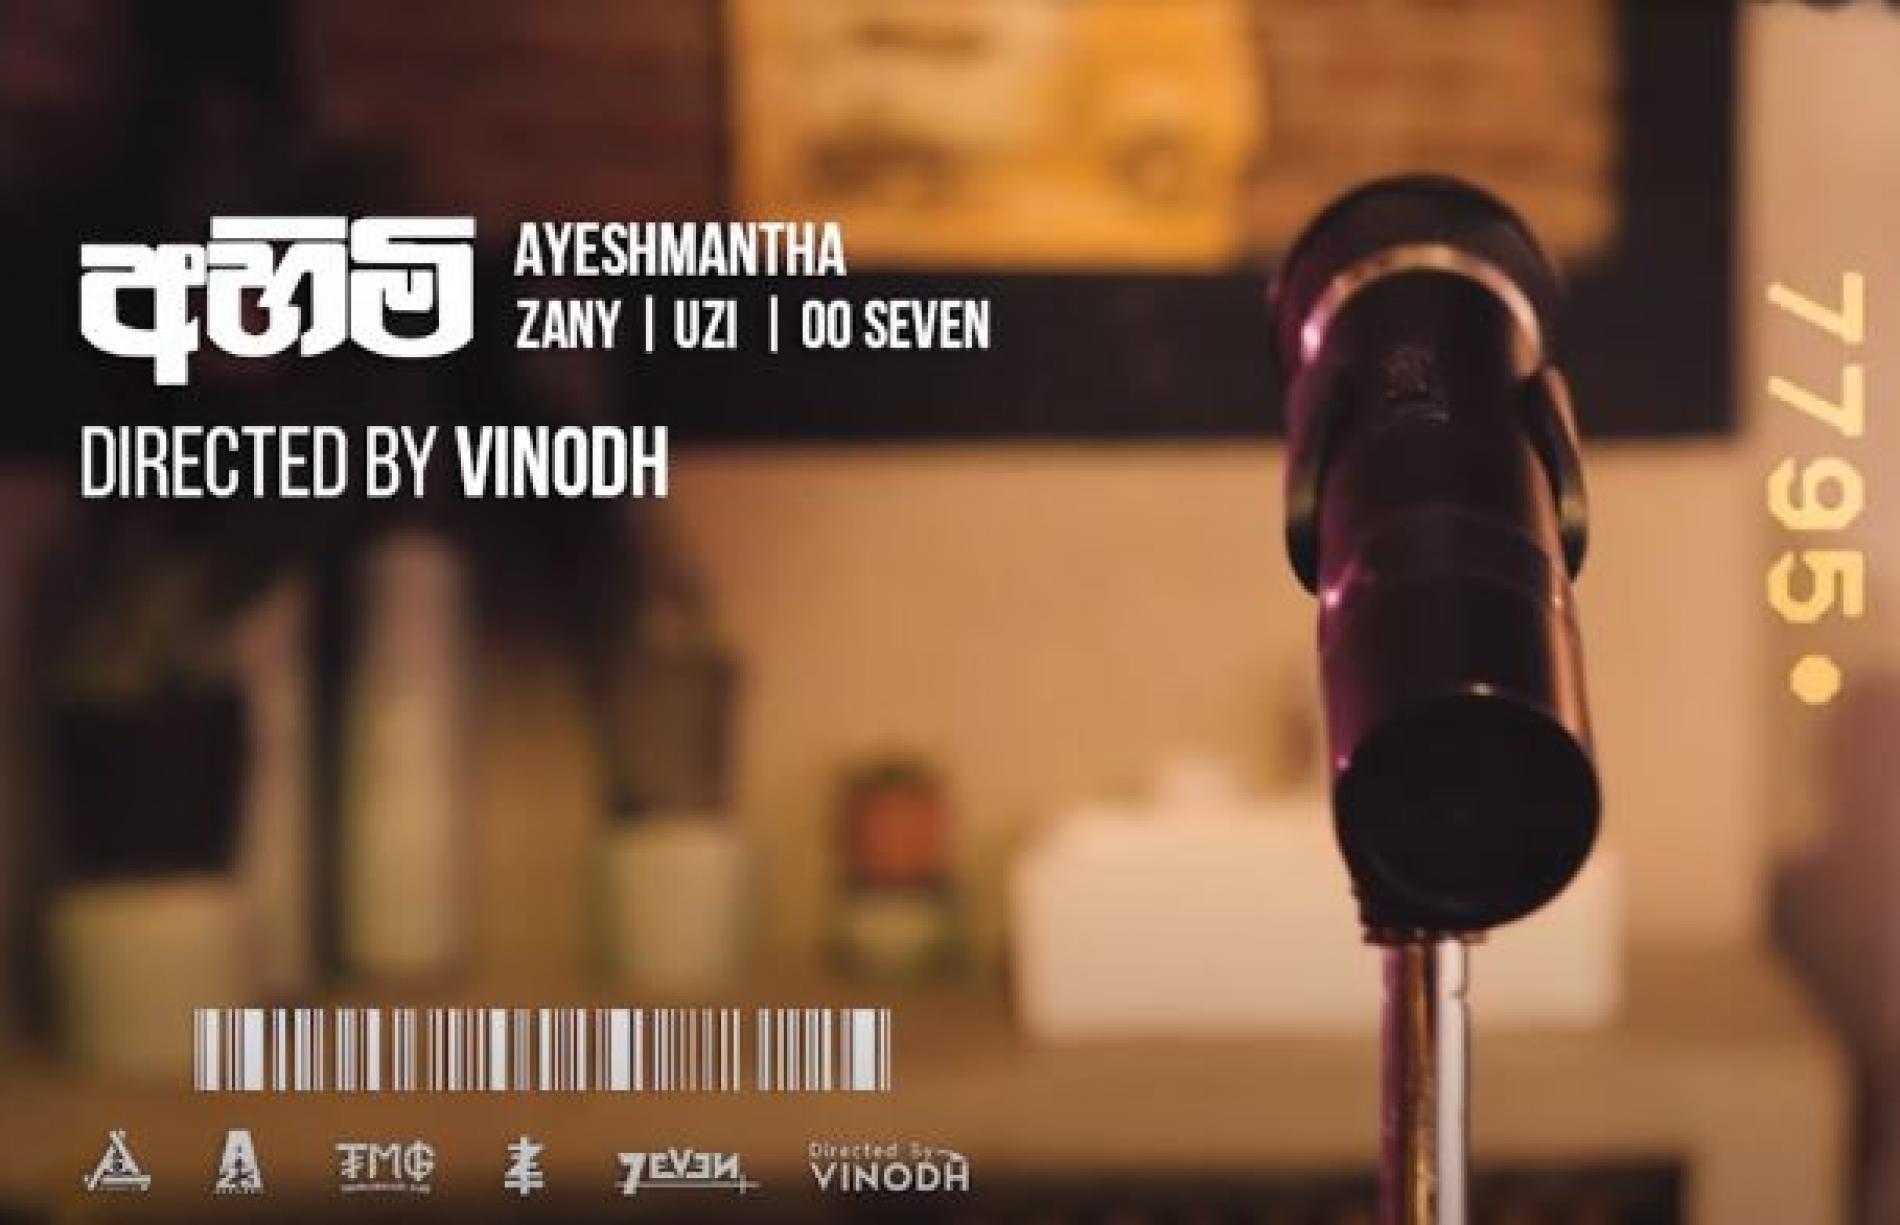 New Music : Ayeshmantha – Ahimi (අහිමි) ft Zany, Uzi & OOSeven (Official Music Video)